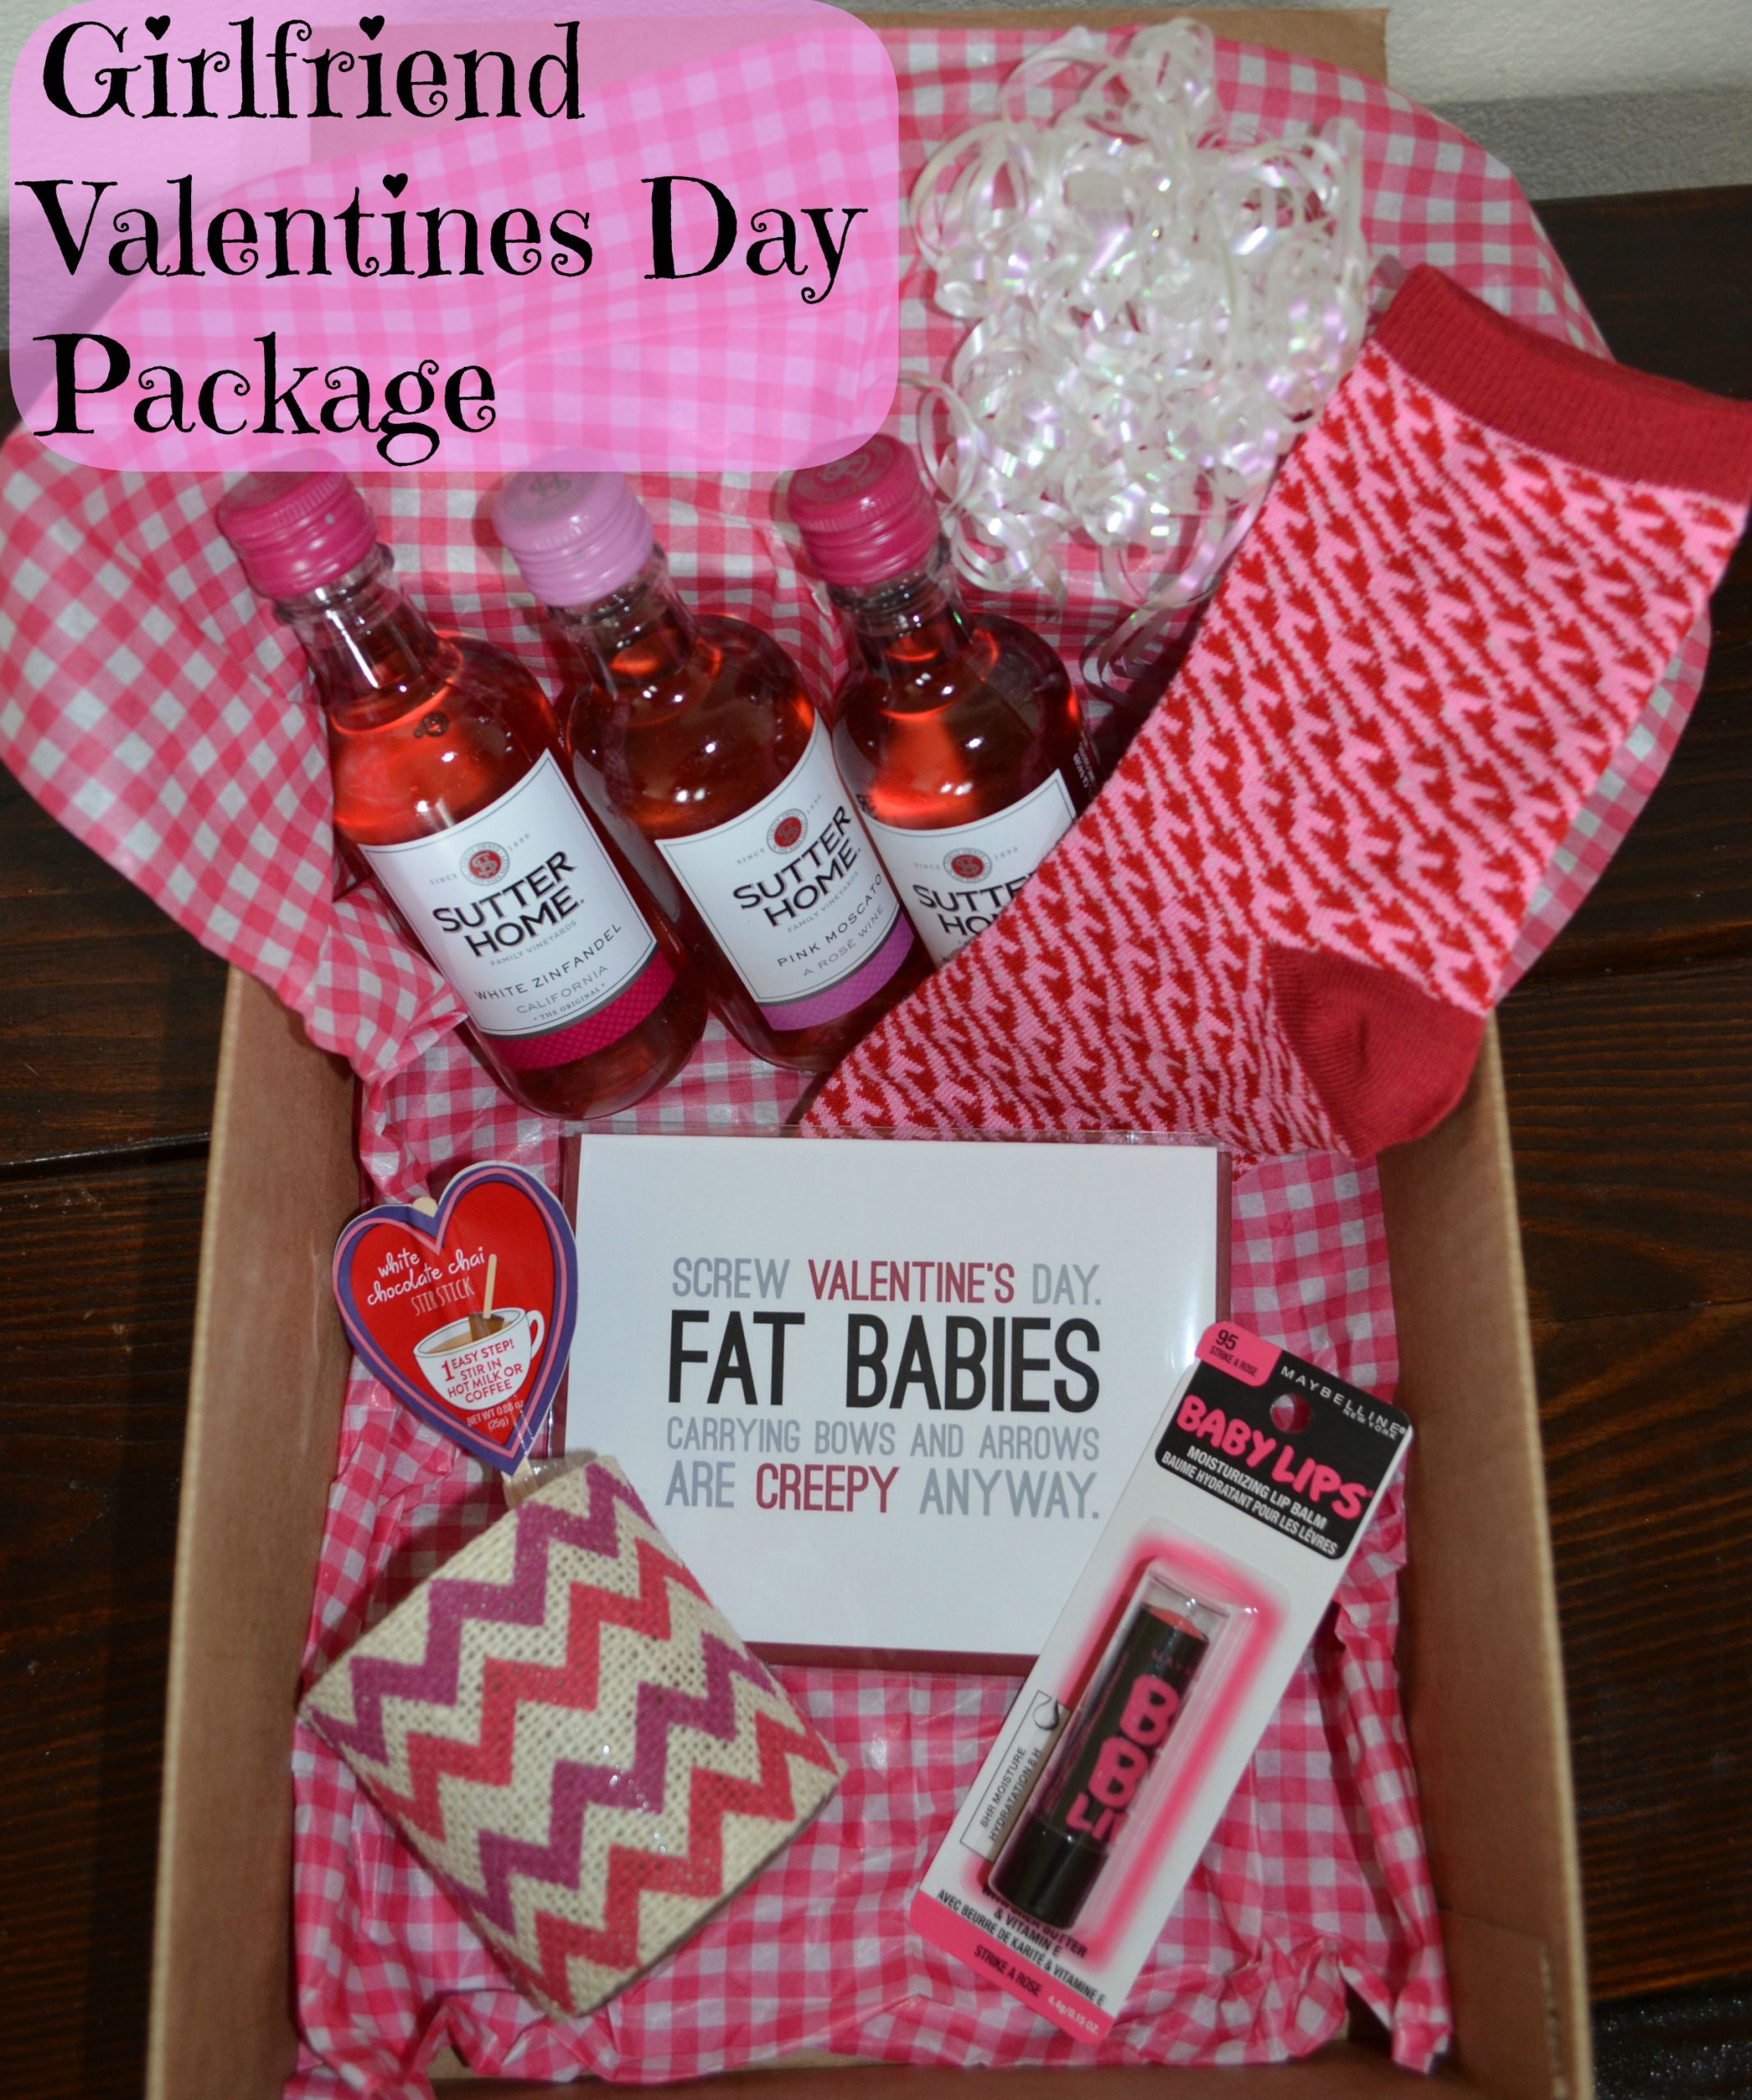 Valentine Gift Ideas Wife
 24 ADORABLE GIFT IDEAS FOR THE WOMEN IN YOUR LIFE